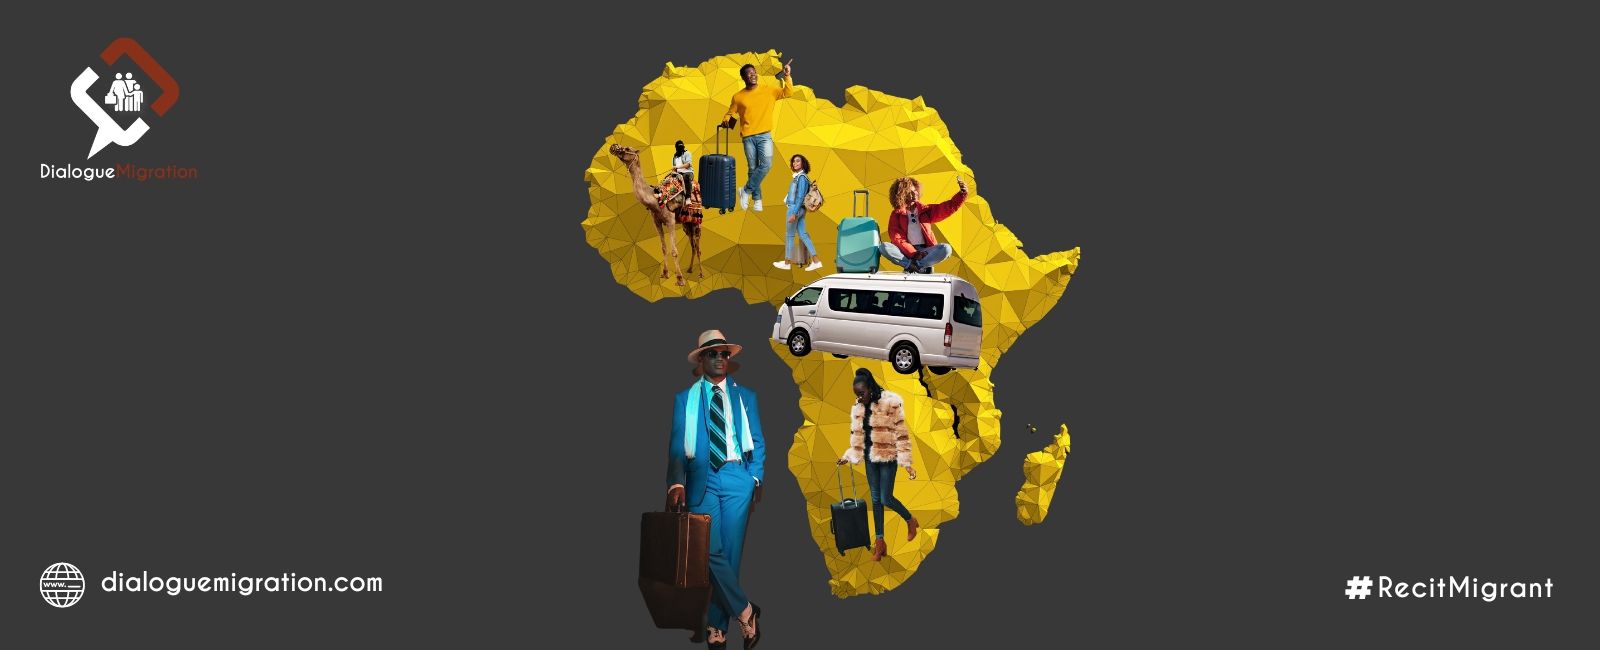 Migration: Africa is actually the first destination for Africans